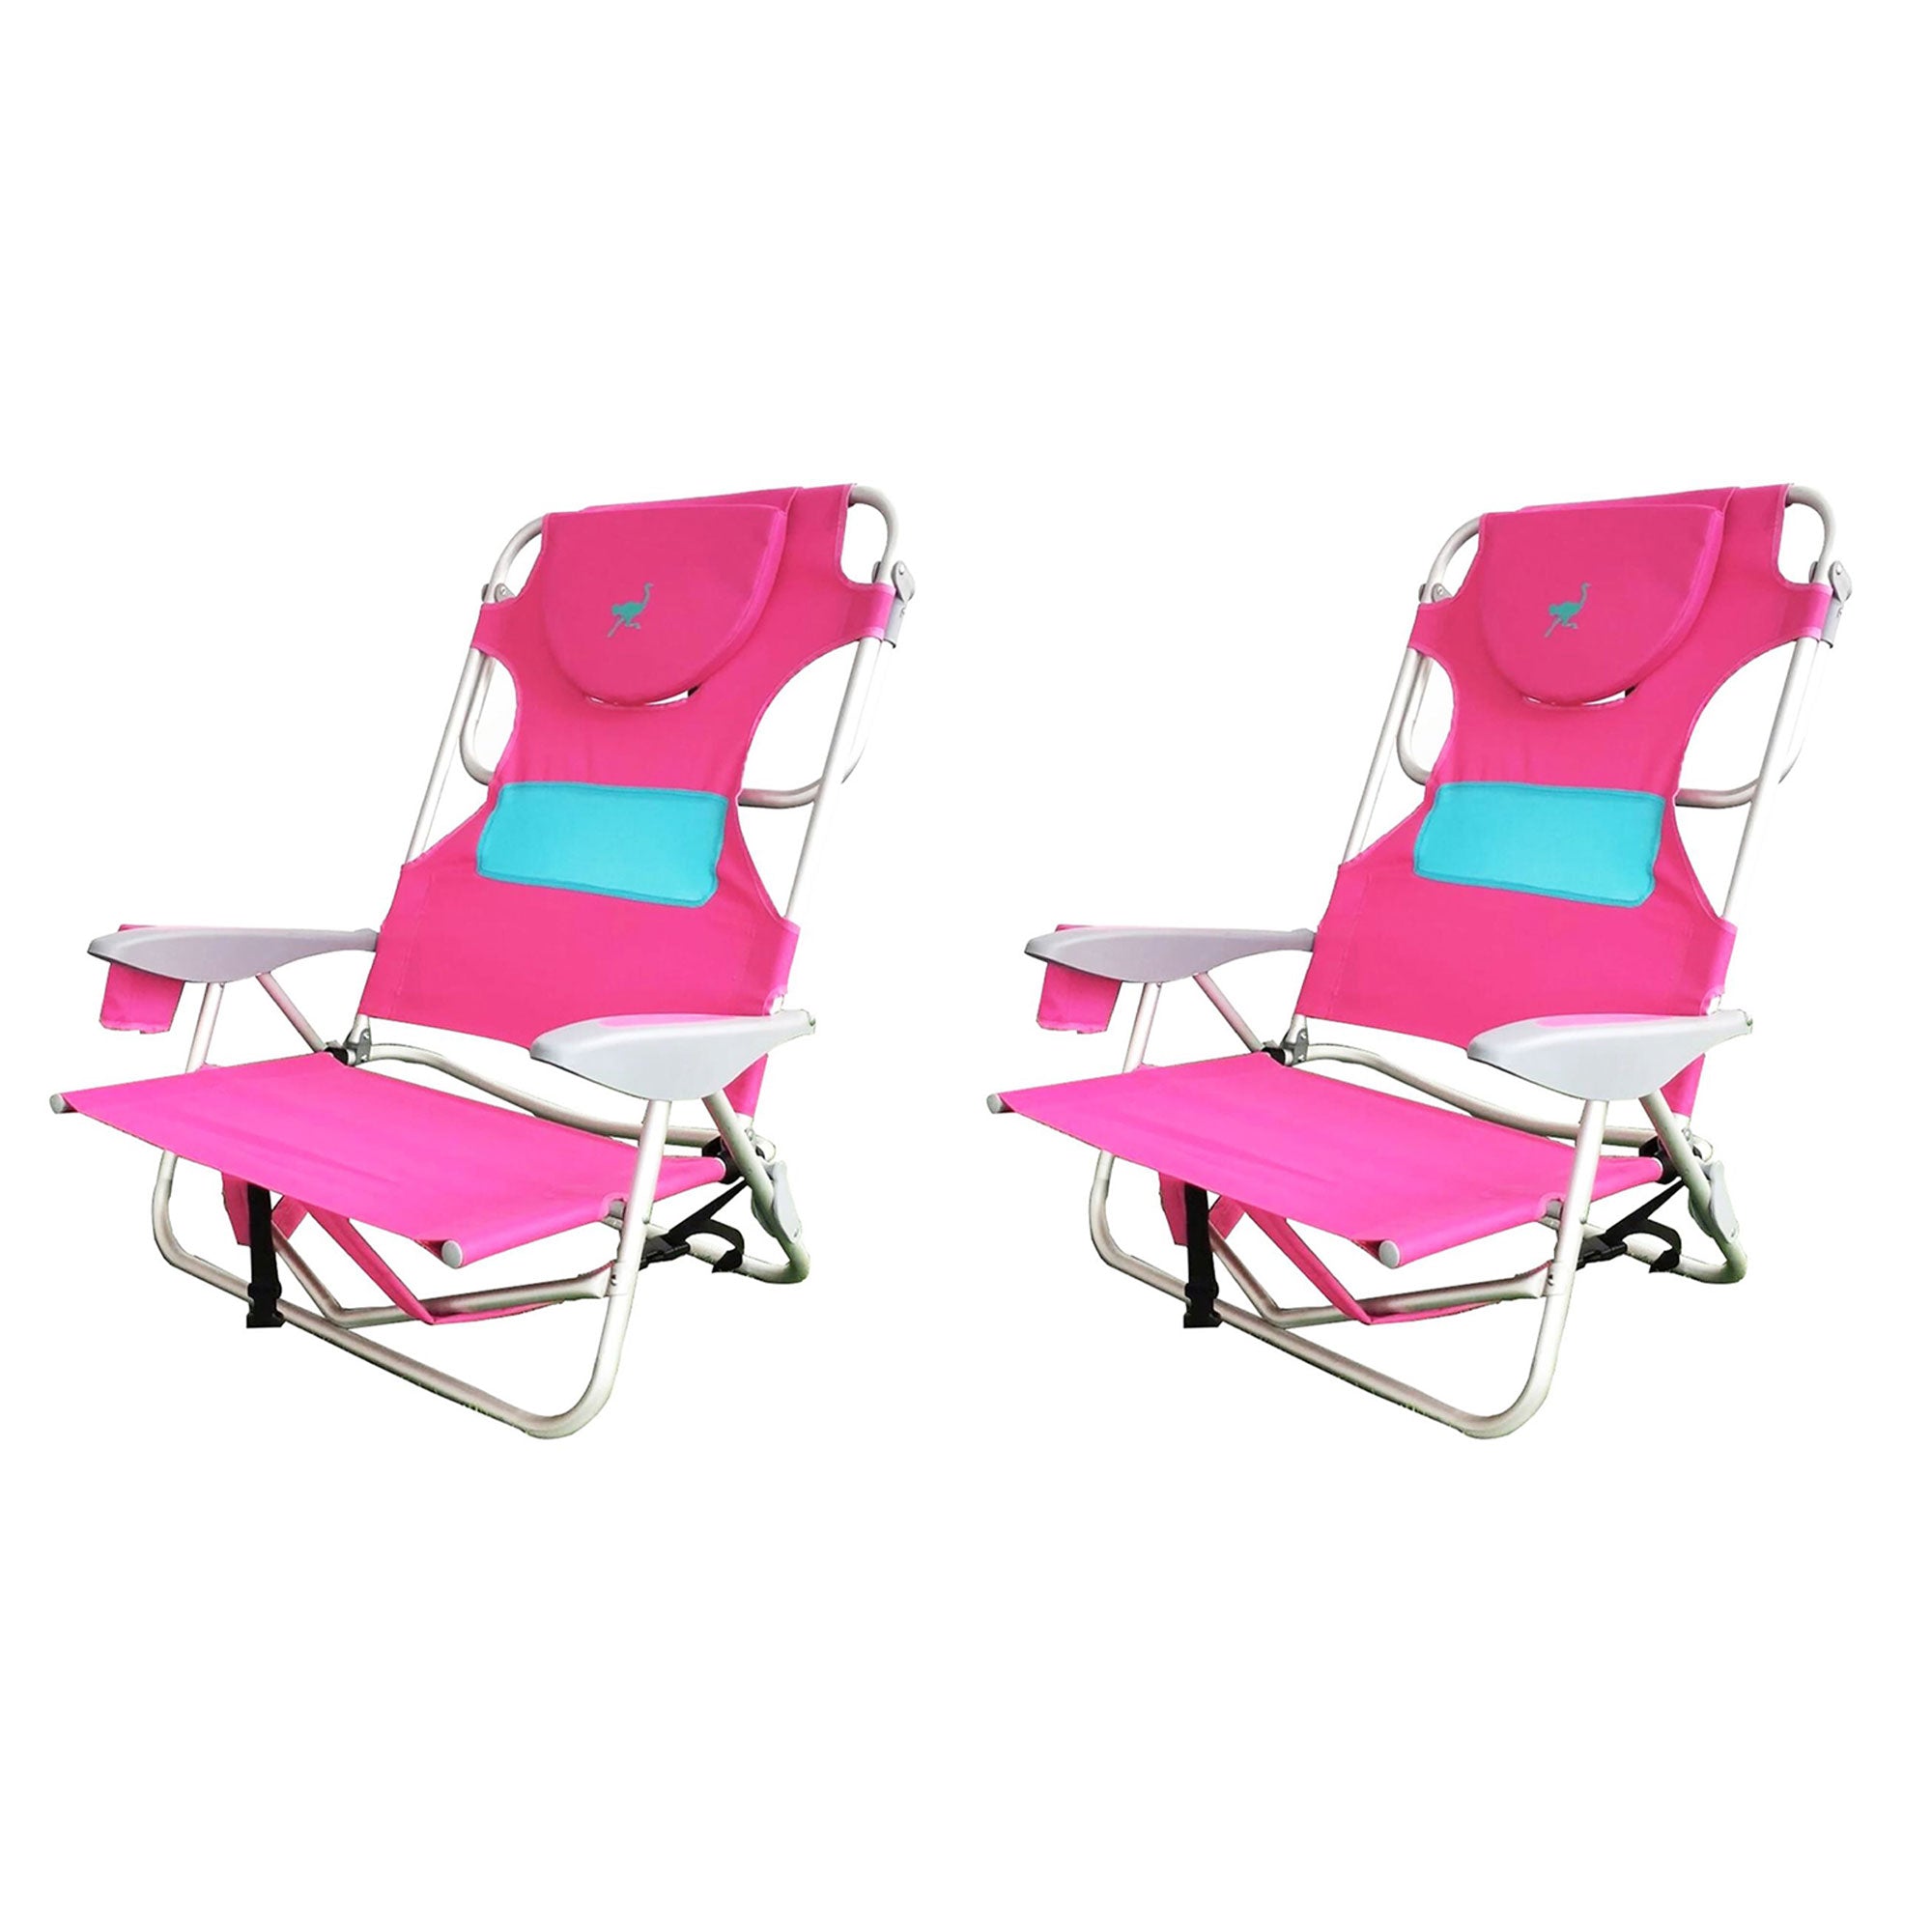 Ostrich-Outdoor-Beach-Ladies-Comfort-on-Your-Back-Beach-Chair,-Pink-(2-Pack)-Chairs-&-Seating